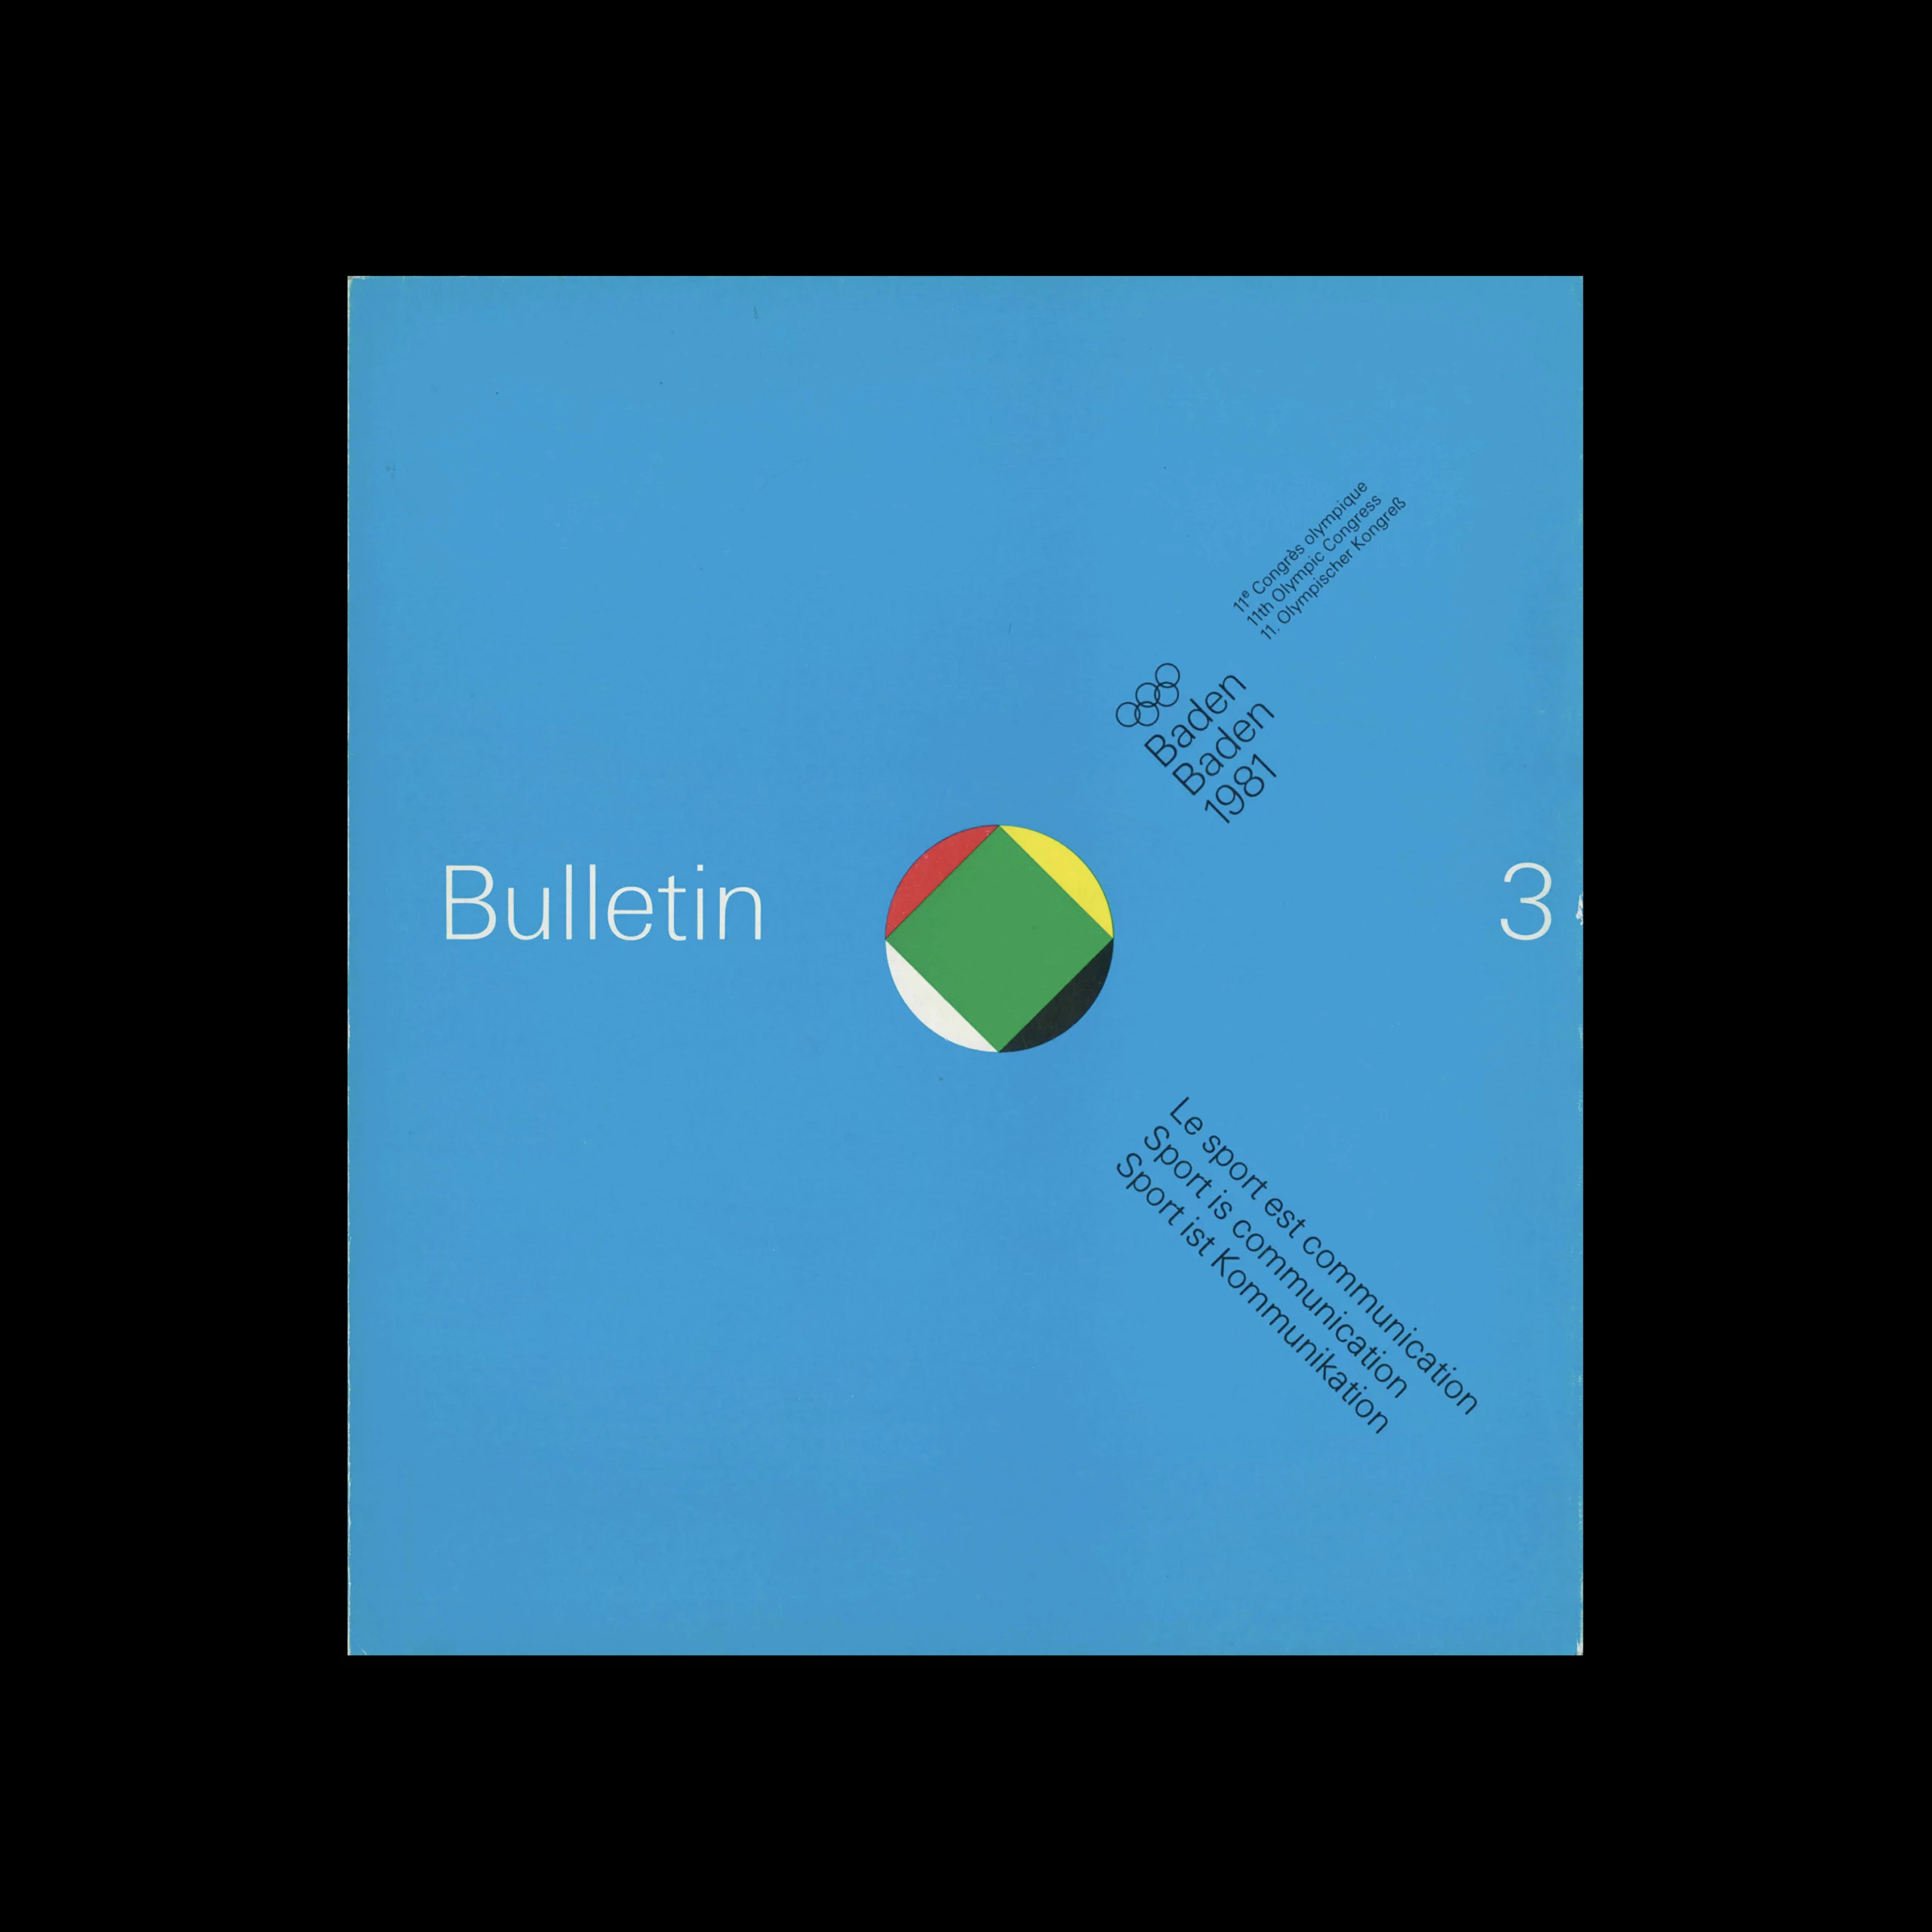 Bulletin 3, 11th Olympic Congress, Sport is Communication, 1981. Designed by Büro Rolf Müller